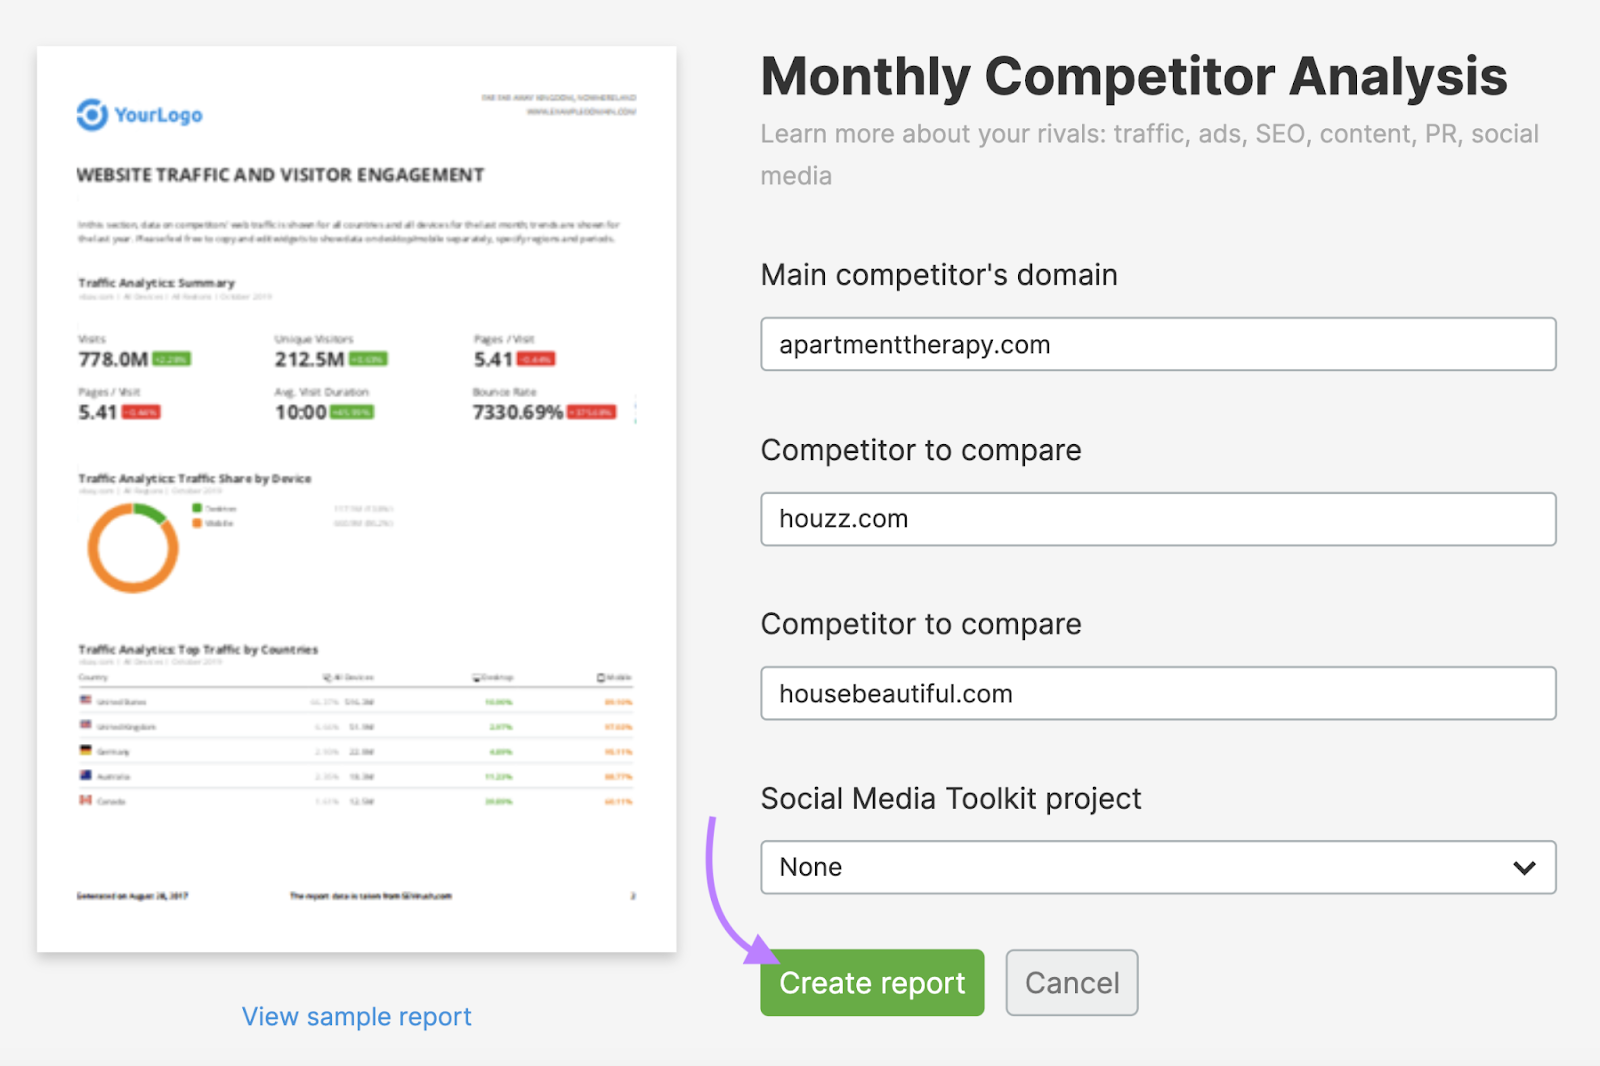 Creating Monthly Competitor Analysis report